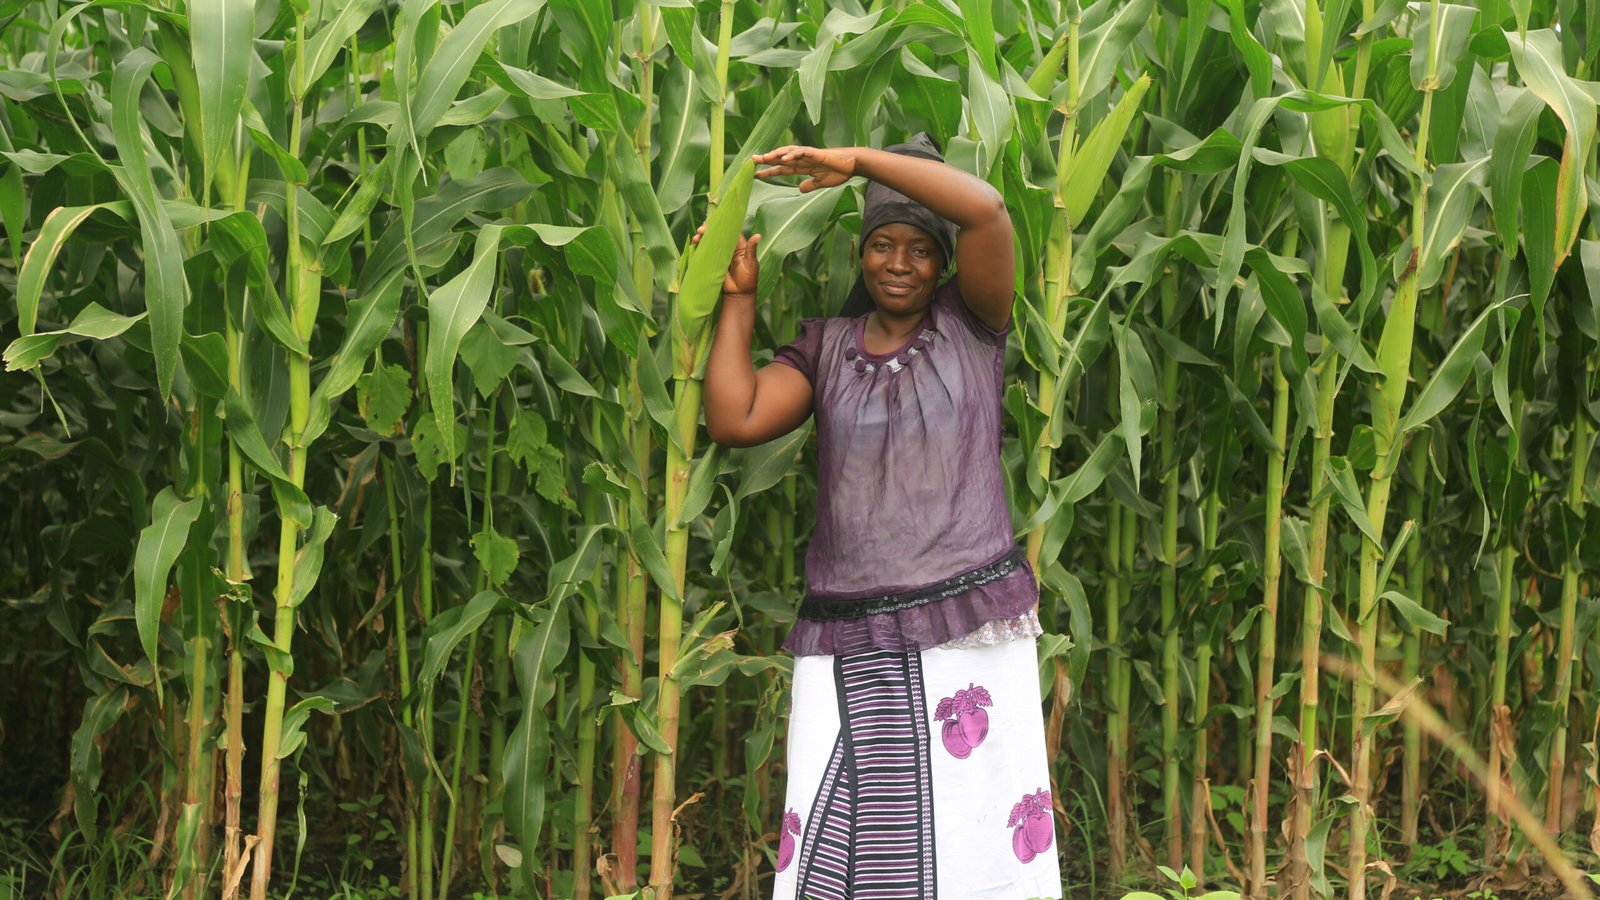 Route to Market: Sustainable growth opportunities for SME’s in Tanzania’s maize value chain